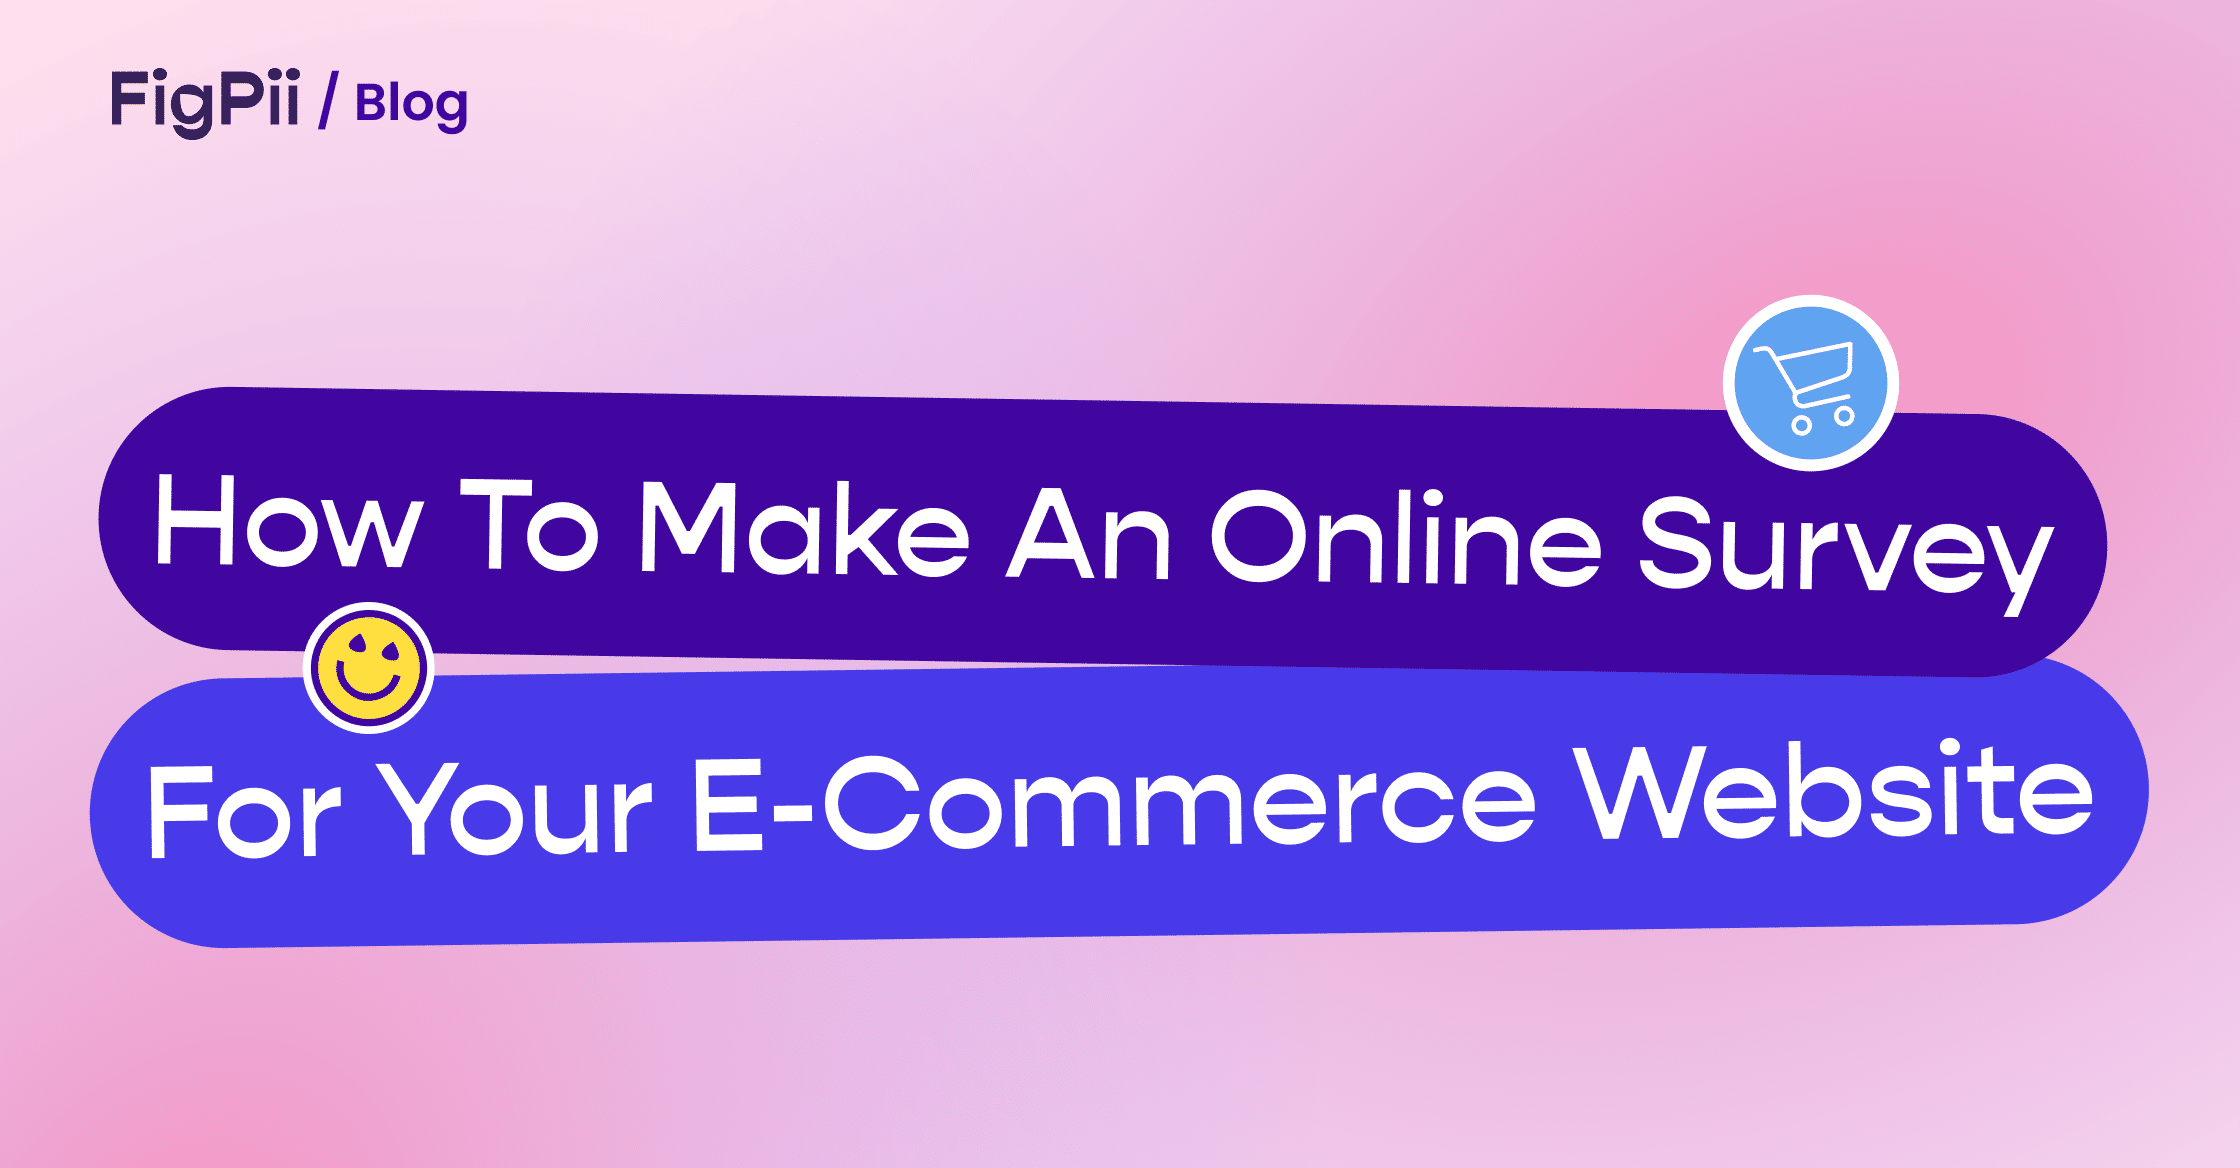 Featured image for article on "How to make an online survey for your ecommerce website"